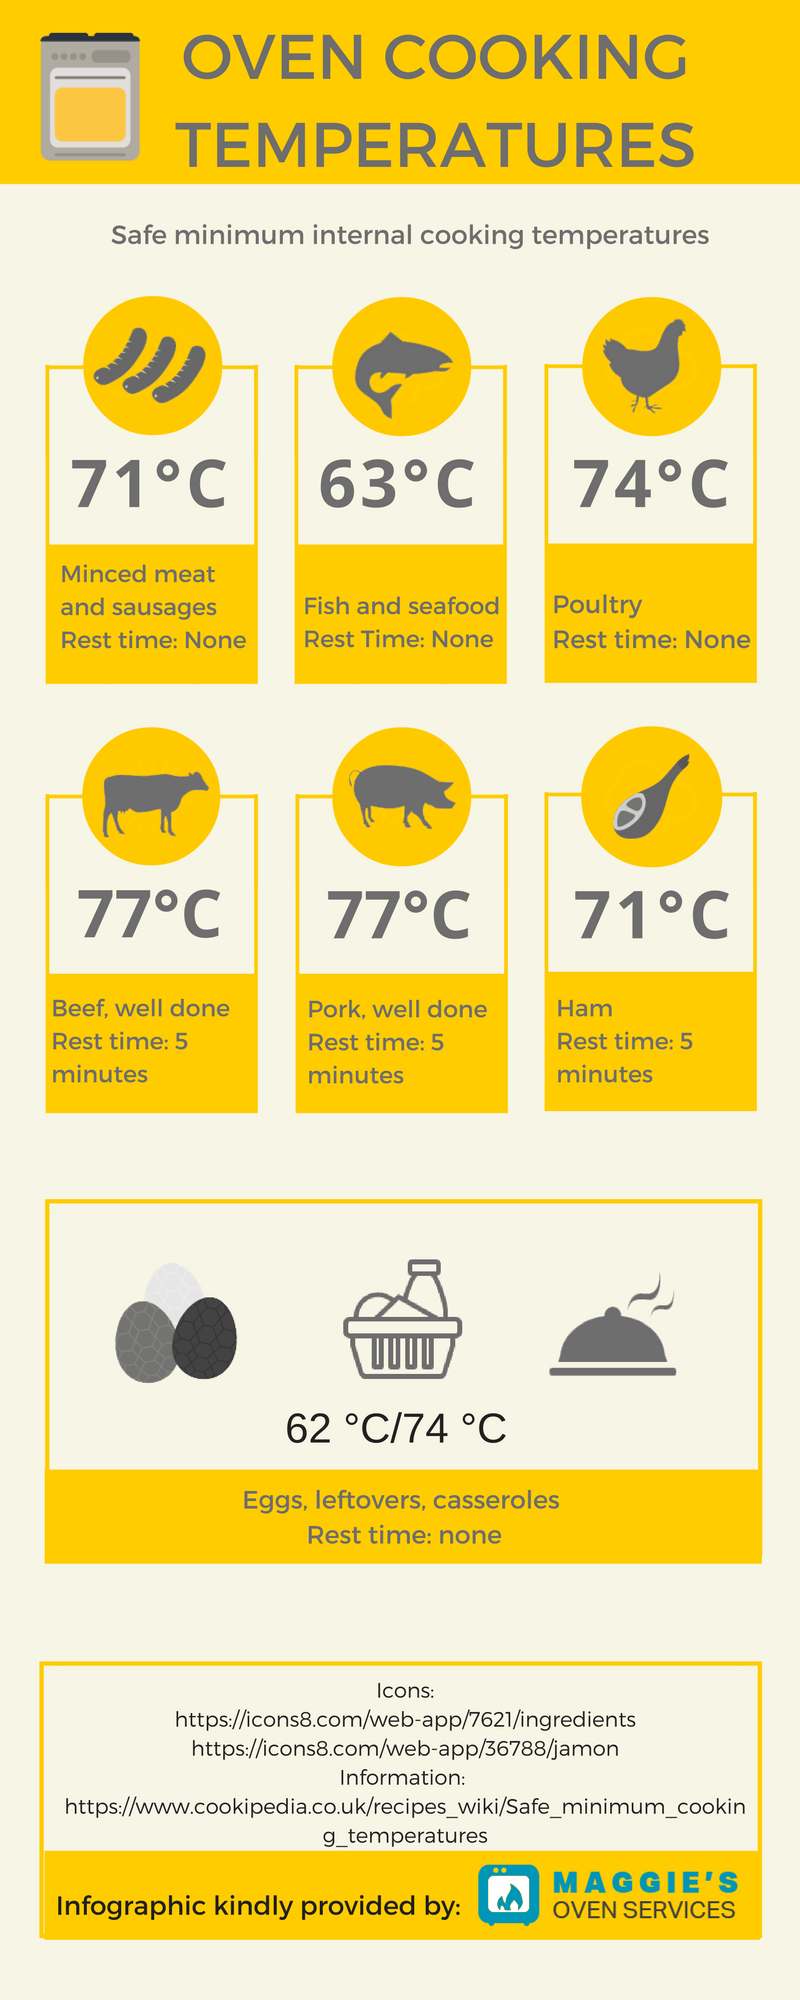 Oven Cooking Temperatures Infographic Maggies Oven Services